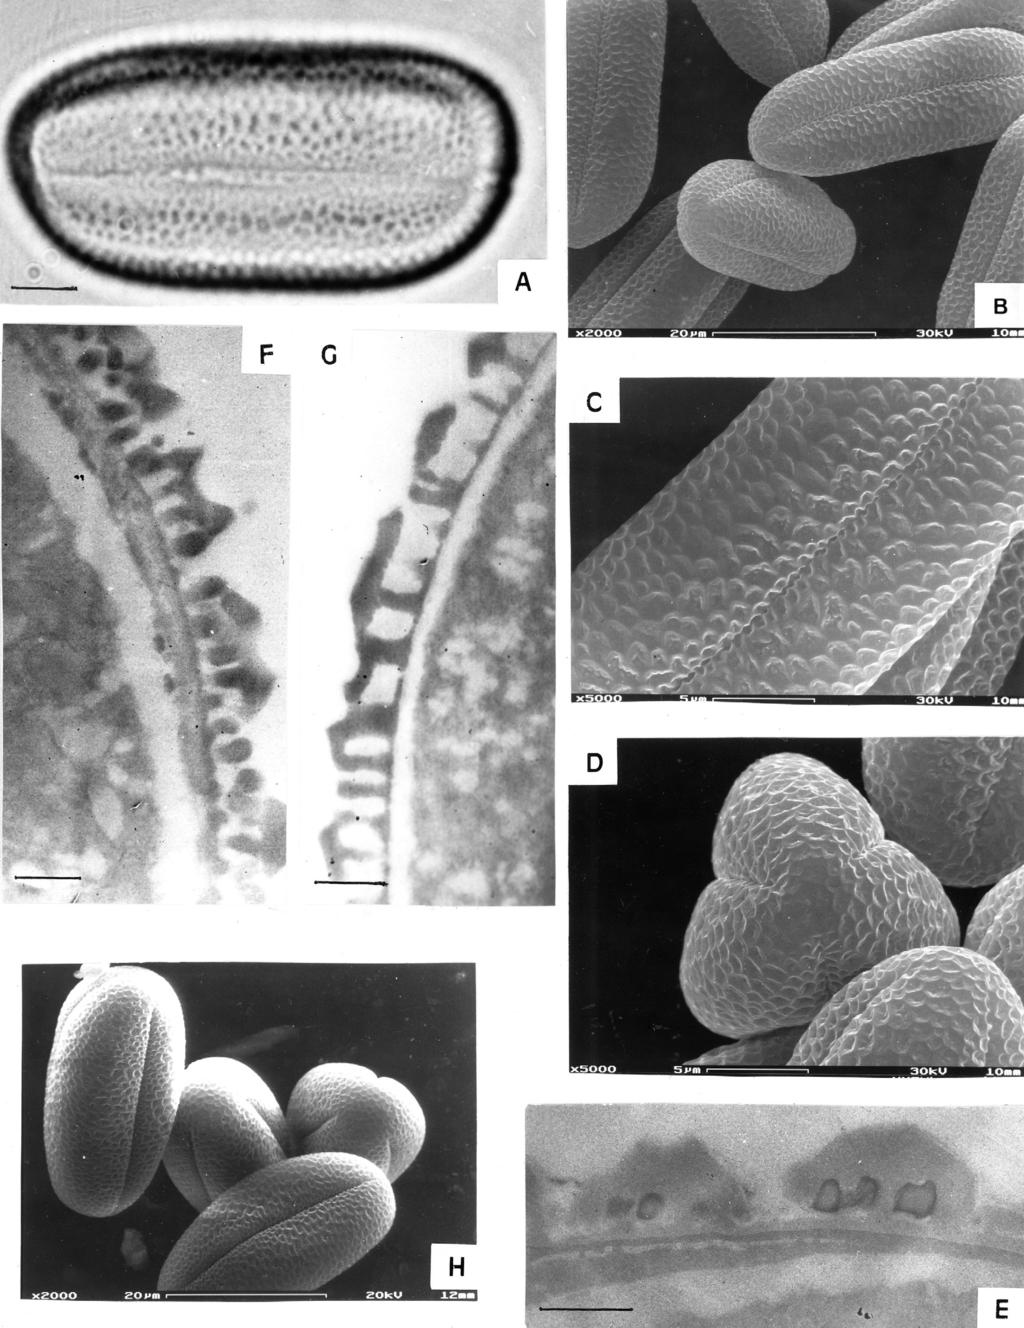 ANN. BOT. FENNICI 37 Pollen morphology of Onobrychis and Hedysarum 215 Fig. 5. A E: Onobrychis lasiostachya. A: LM colpus and ornamentation. Scale bar = 4µm. B: SEM apocolpium. Scale bar = 20 µm.